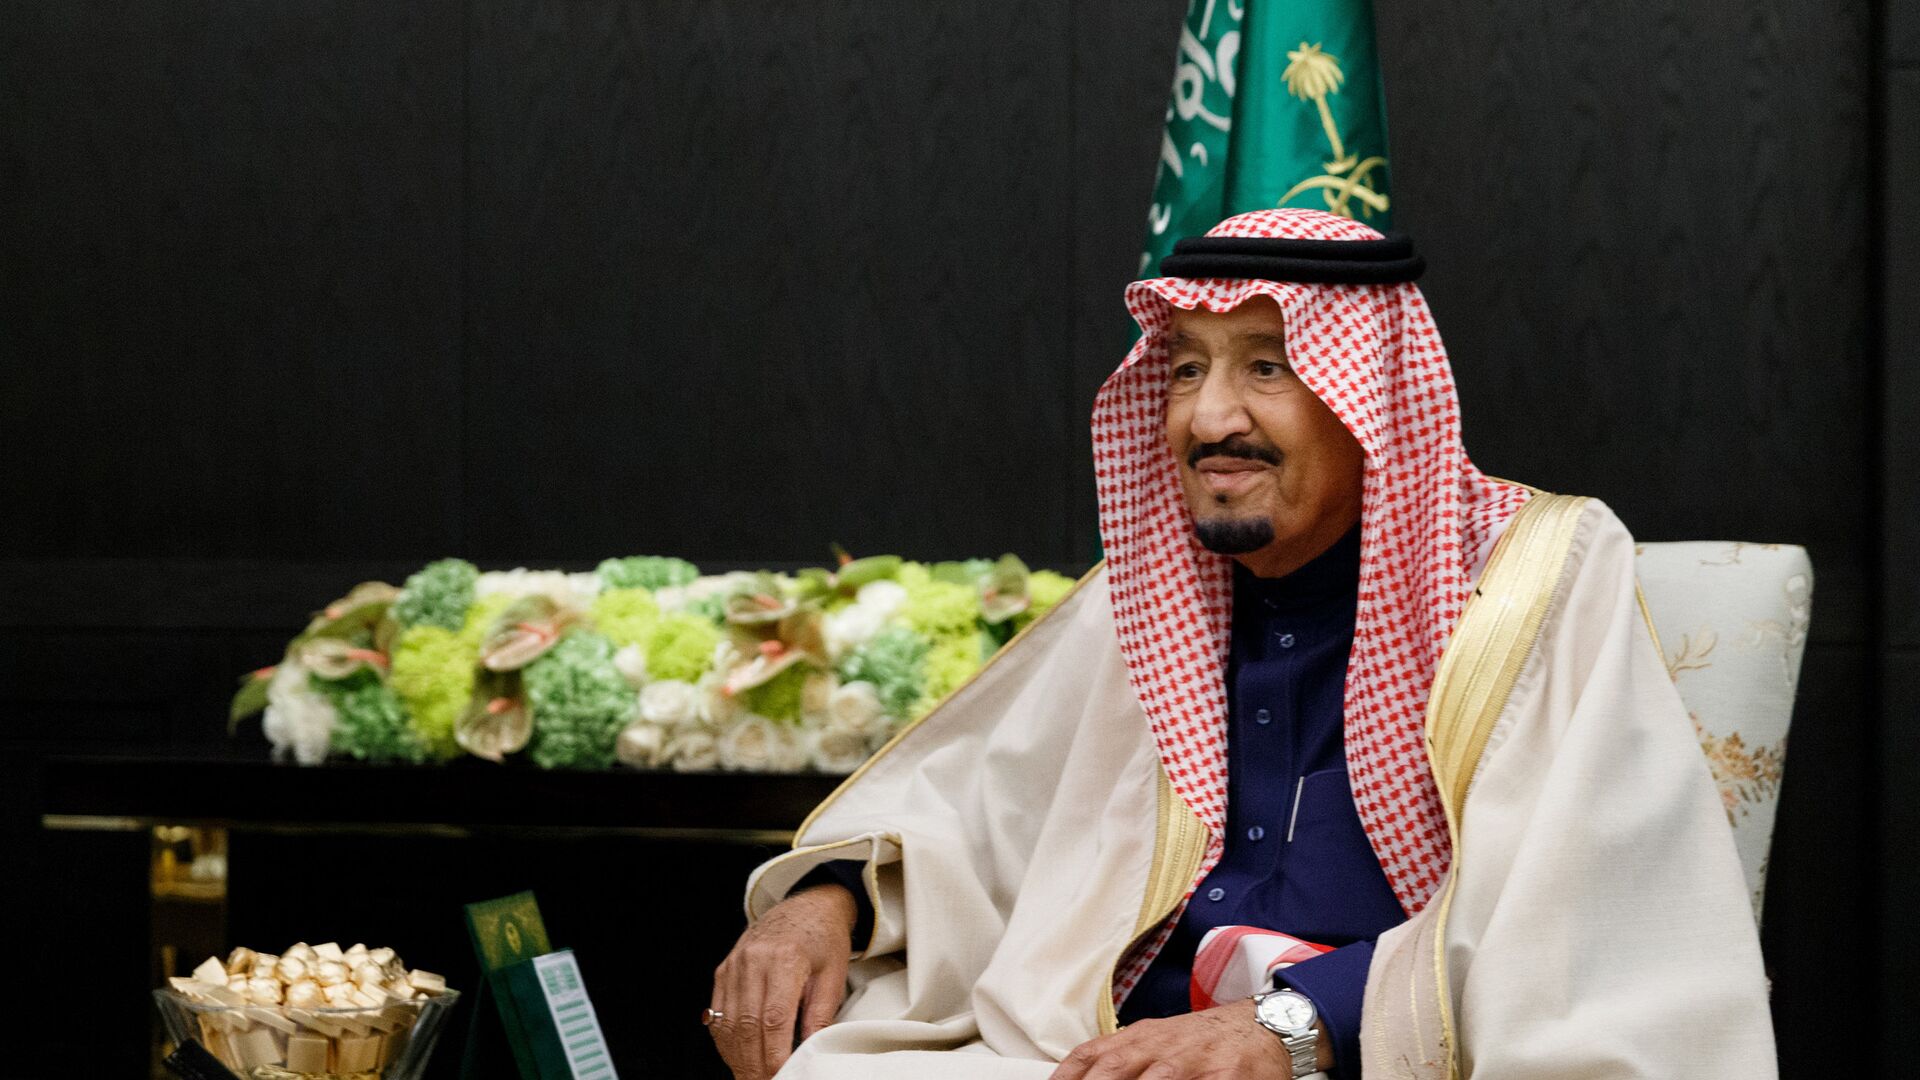 King Salman bin Abdulaziz Al Saud of Saudi Arabia during a meeting with Russian Defense Minister Sergei Shoigu. The image is a handout provided by a third party. Only for internal editorial use. Archiving, commercial use and promotion are prohibited - Sputnik International, 1920, 07.09.2021